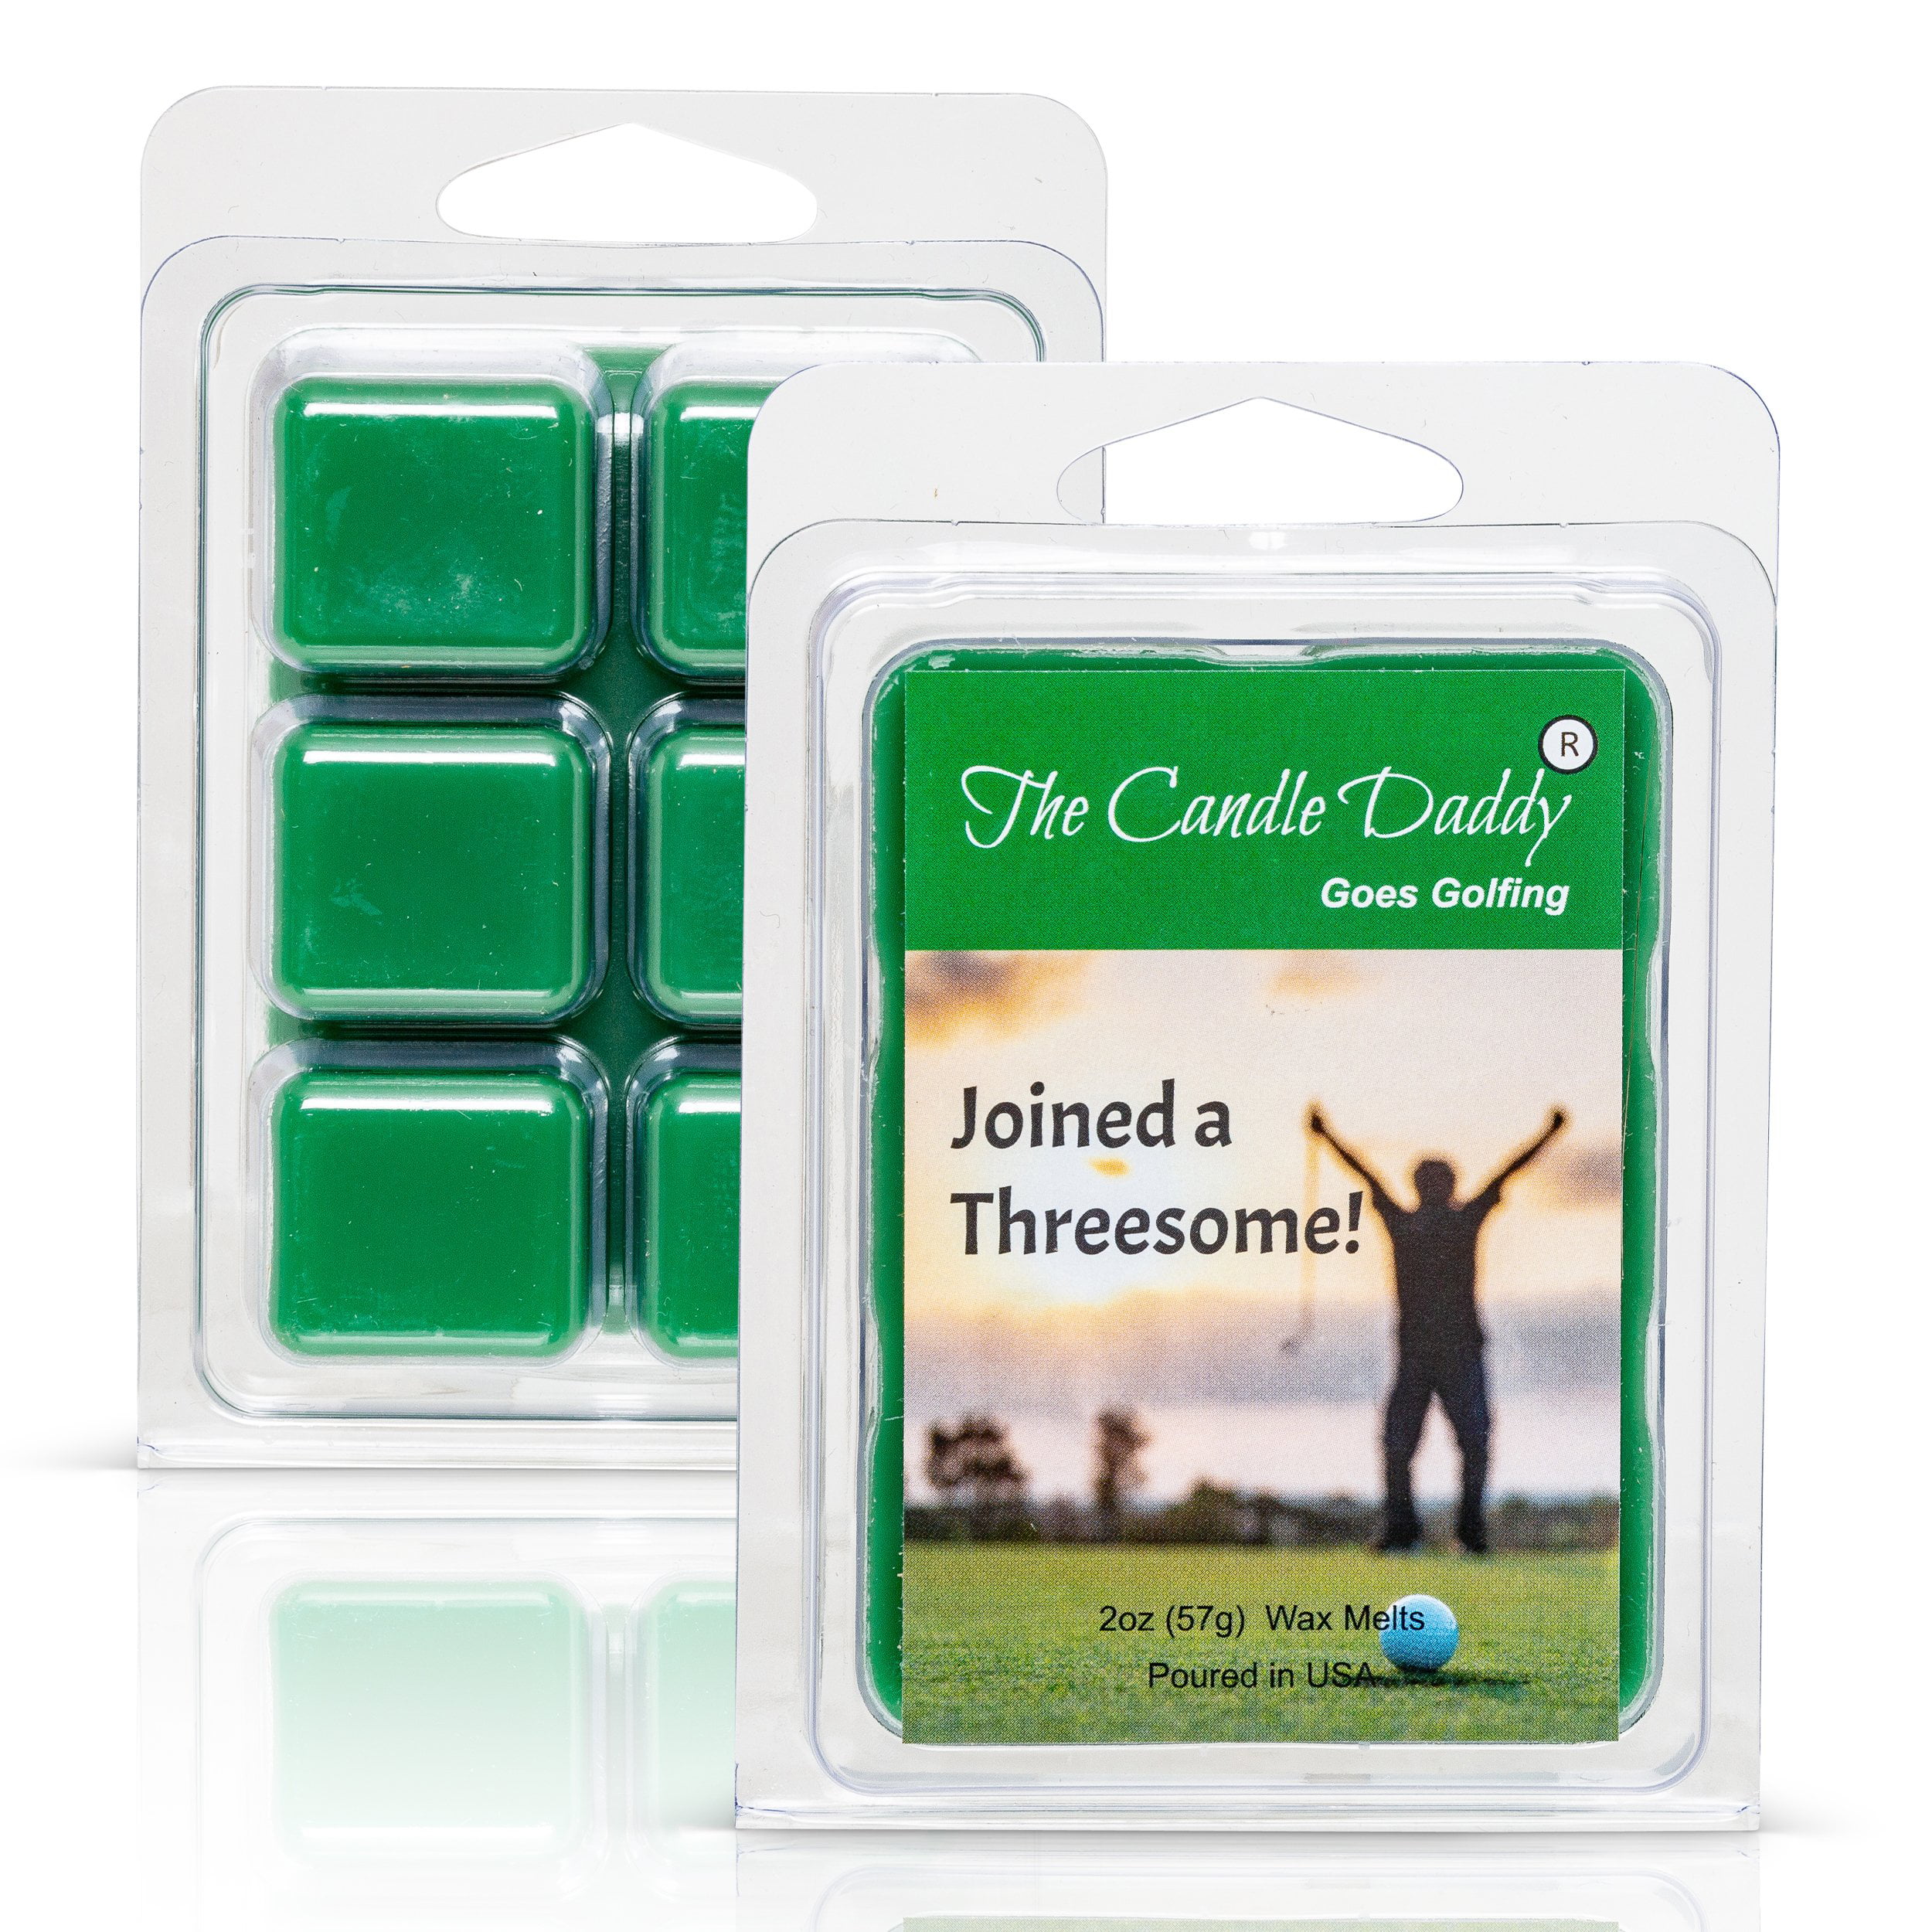 Case of 14 Tyler Scented Wax Mixer Melts or Wax Tarts DOLCE-VITA 